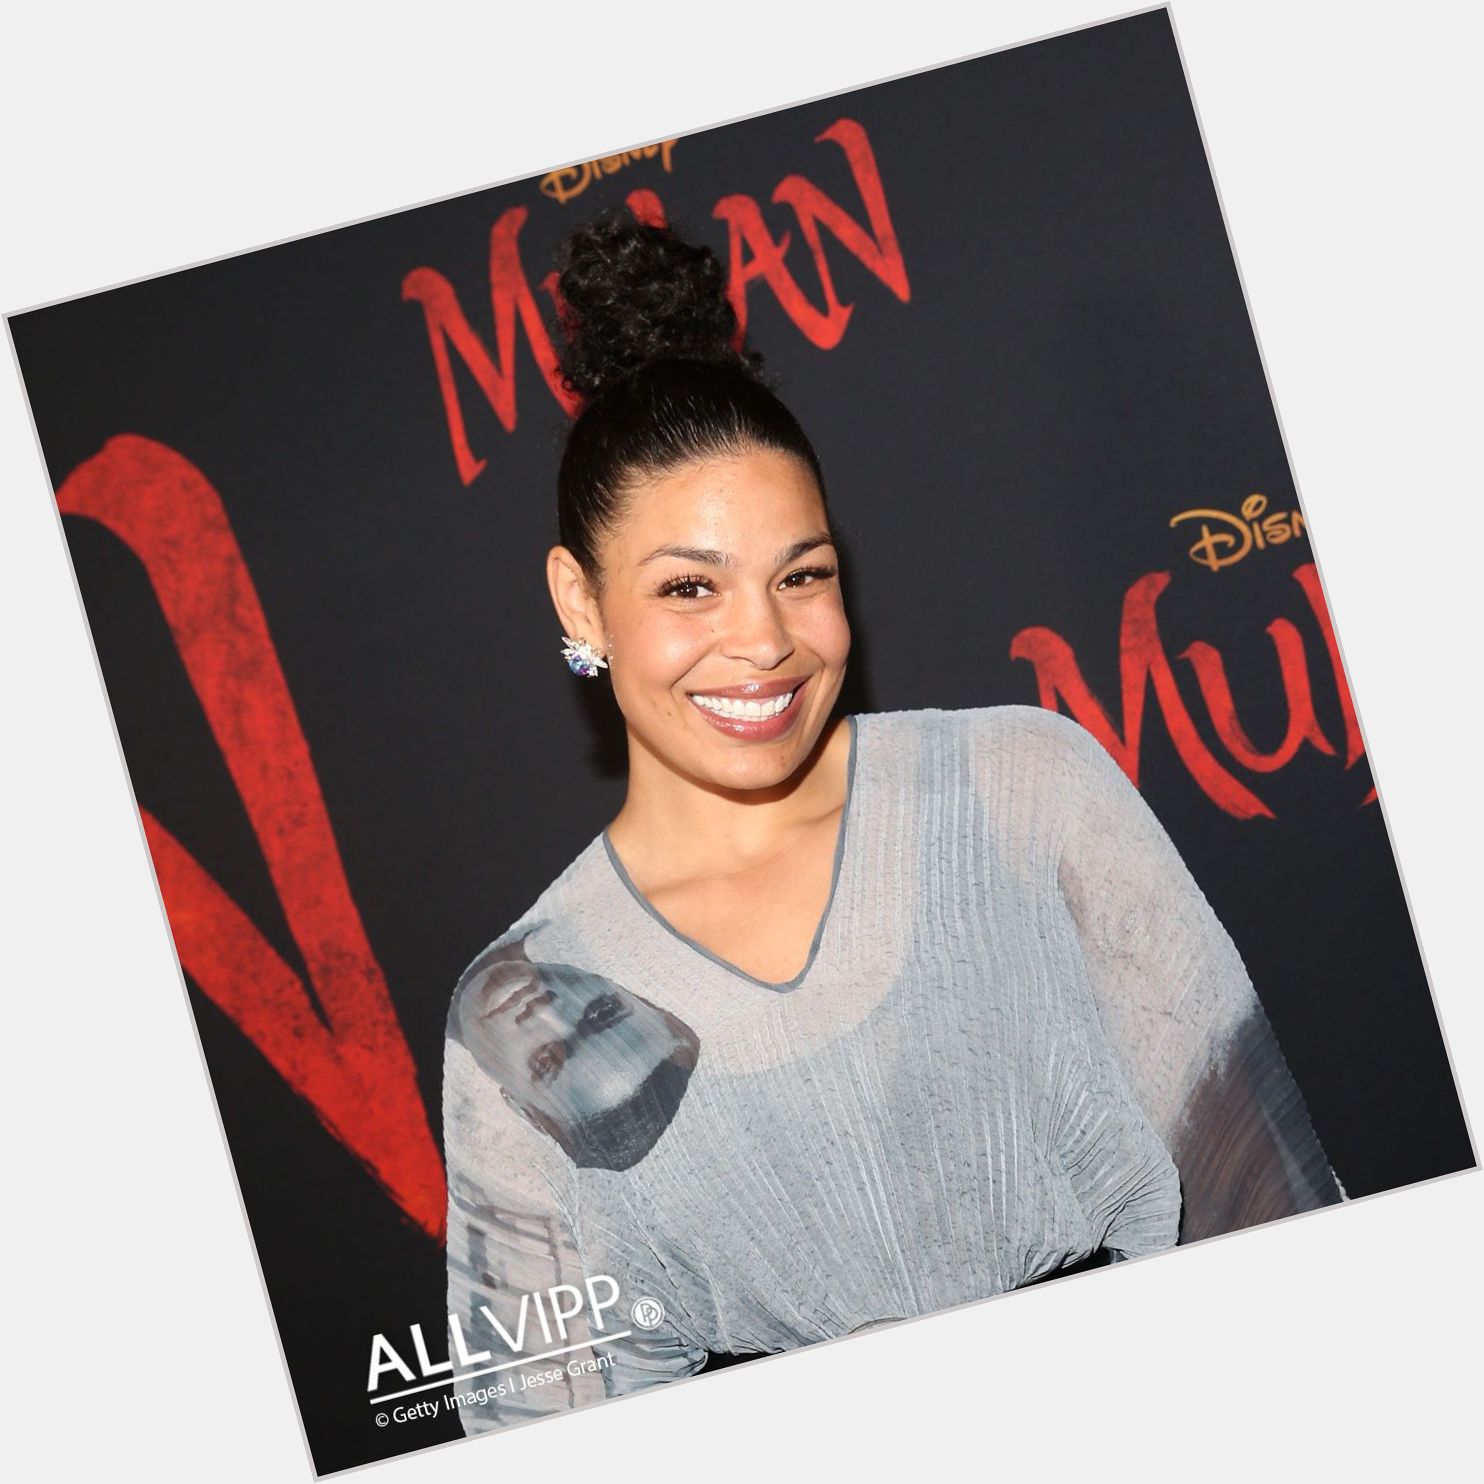 Happy 31st Birthday to Jordin Sparks!  We wish the gorgeous singer all the best!  